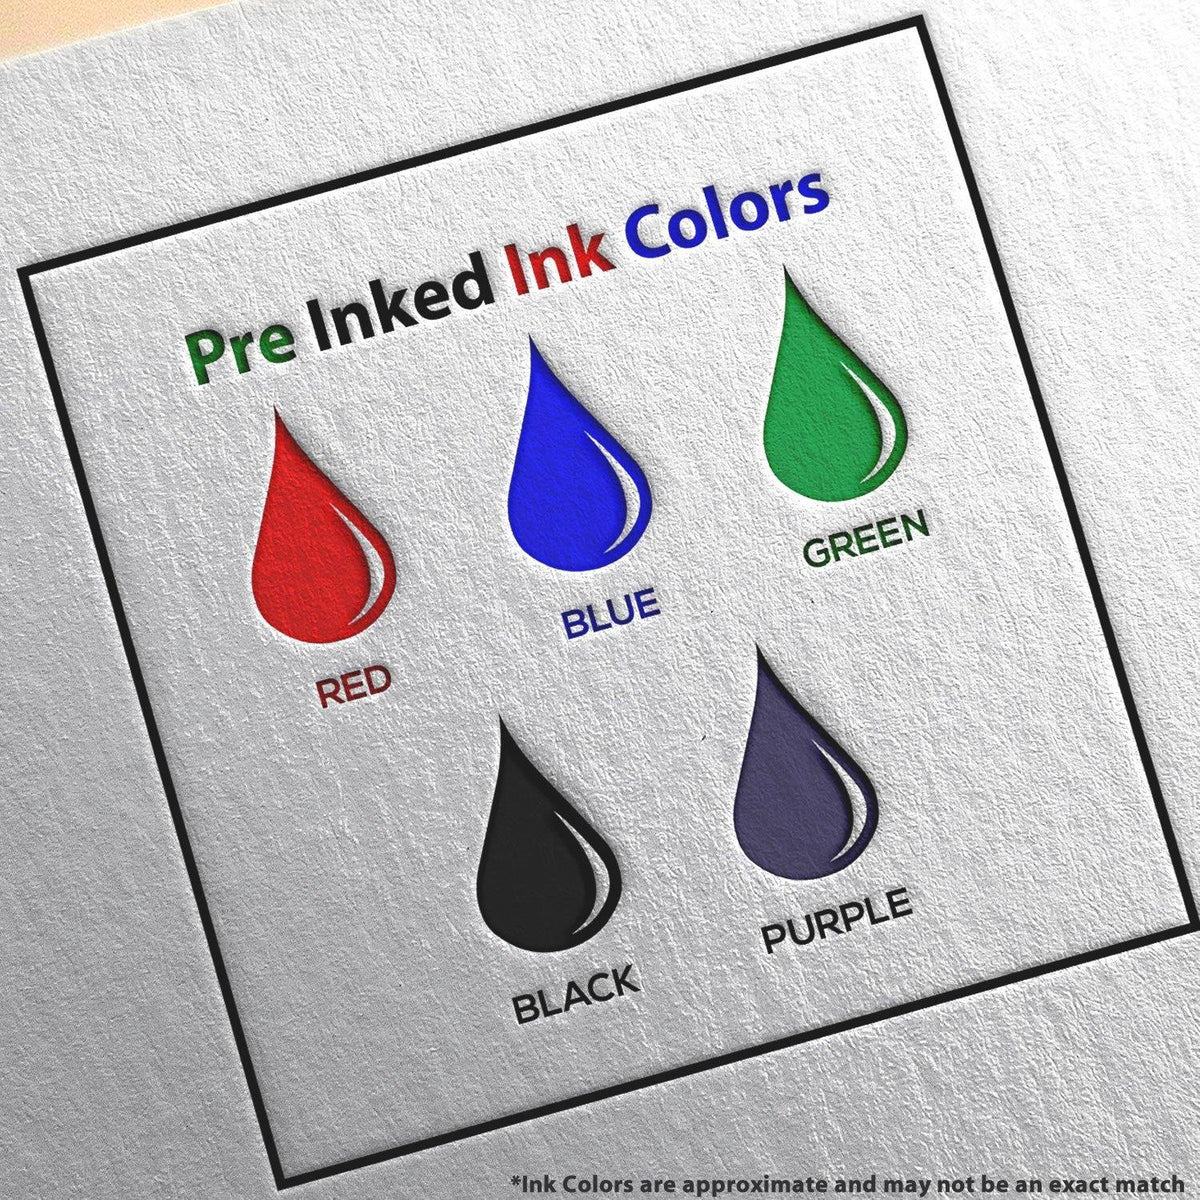 Large Pre-Inked Paid with Ck No Stamp Stamp Ink Color Options